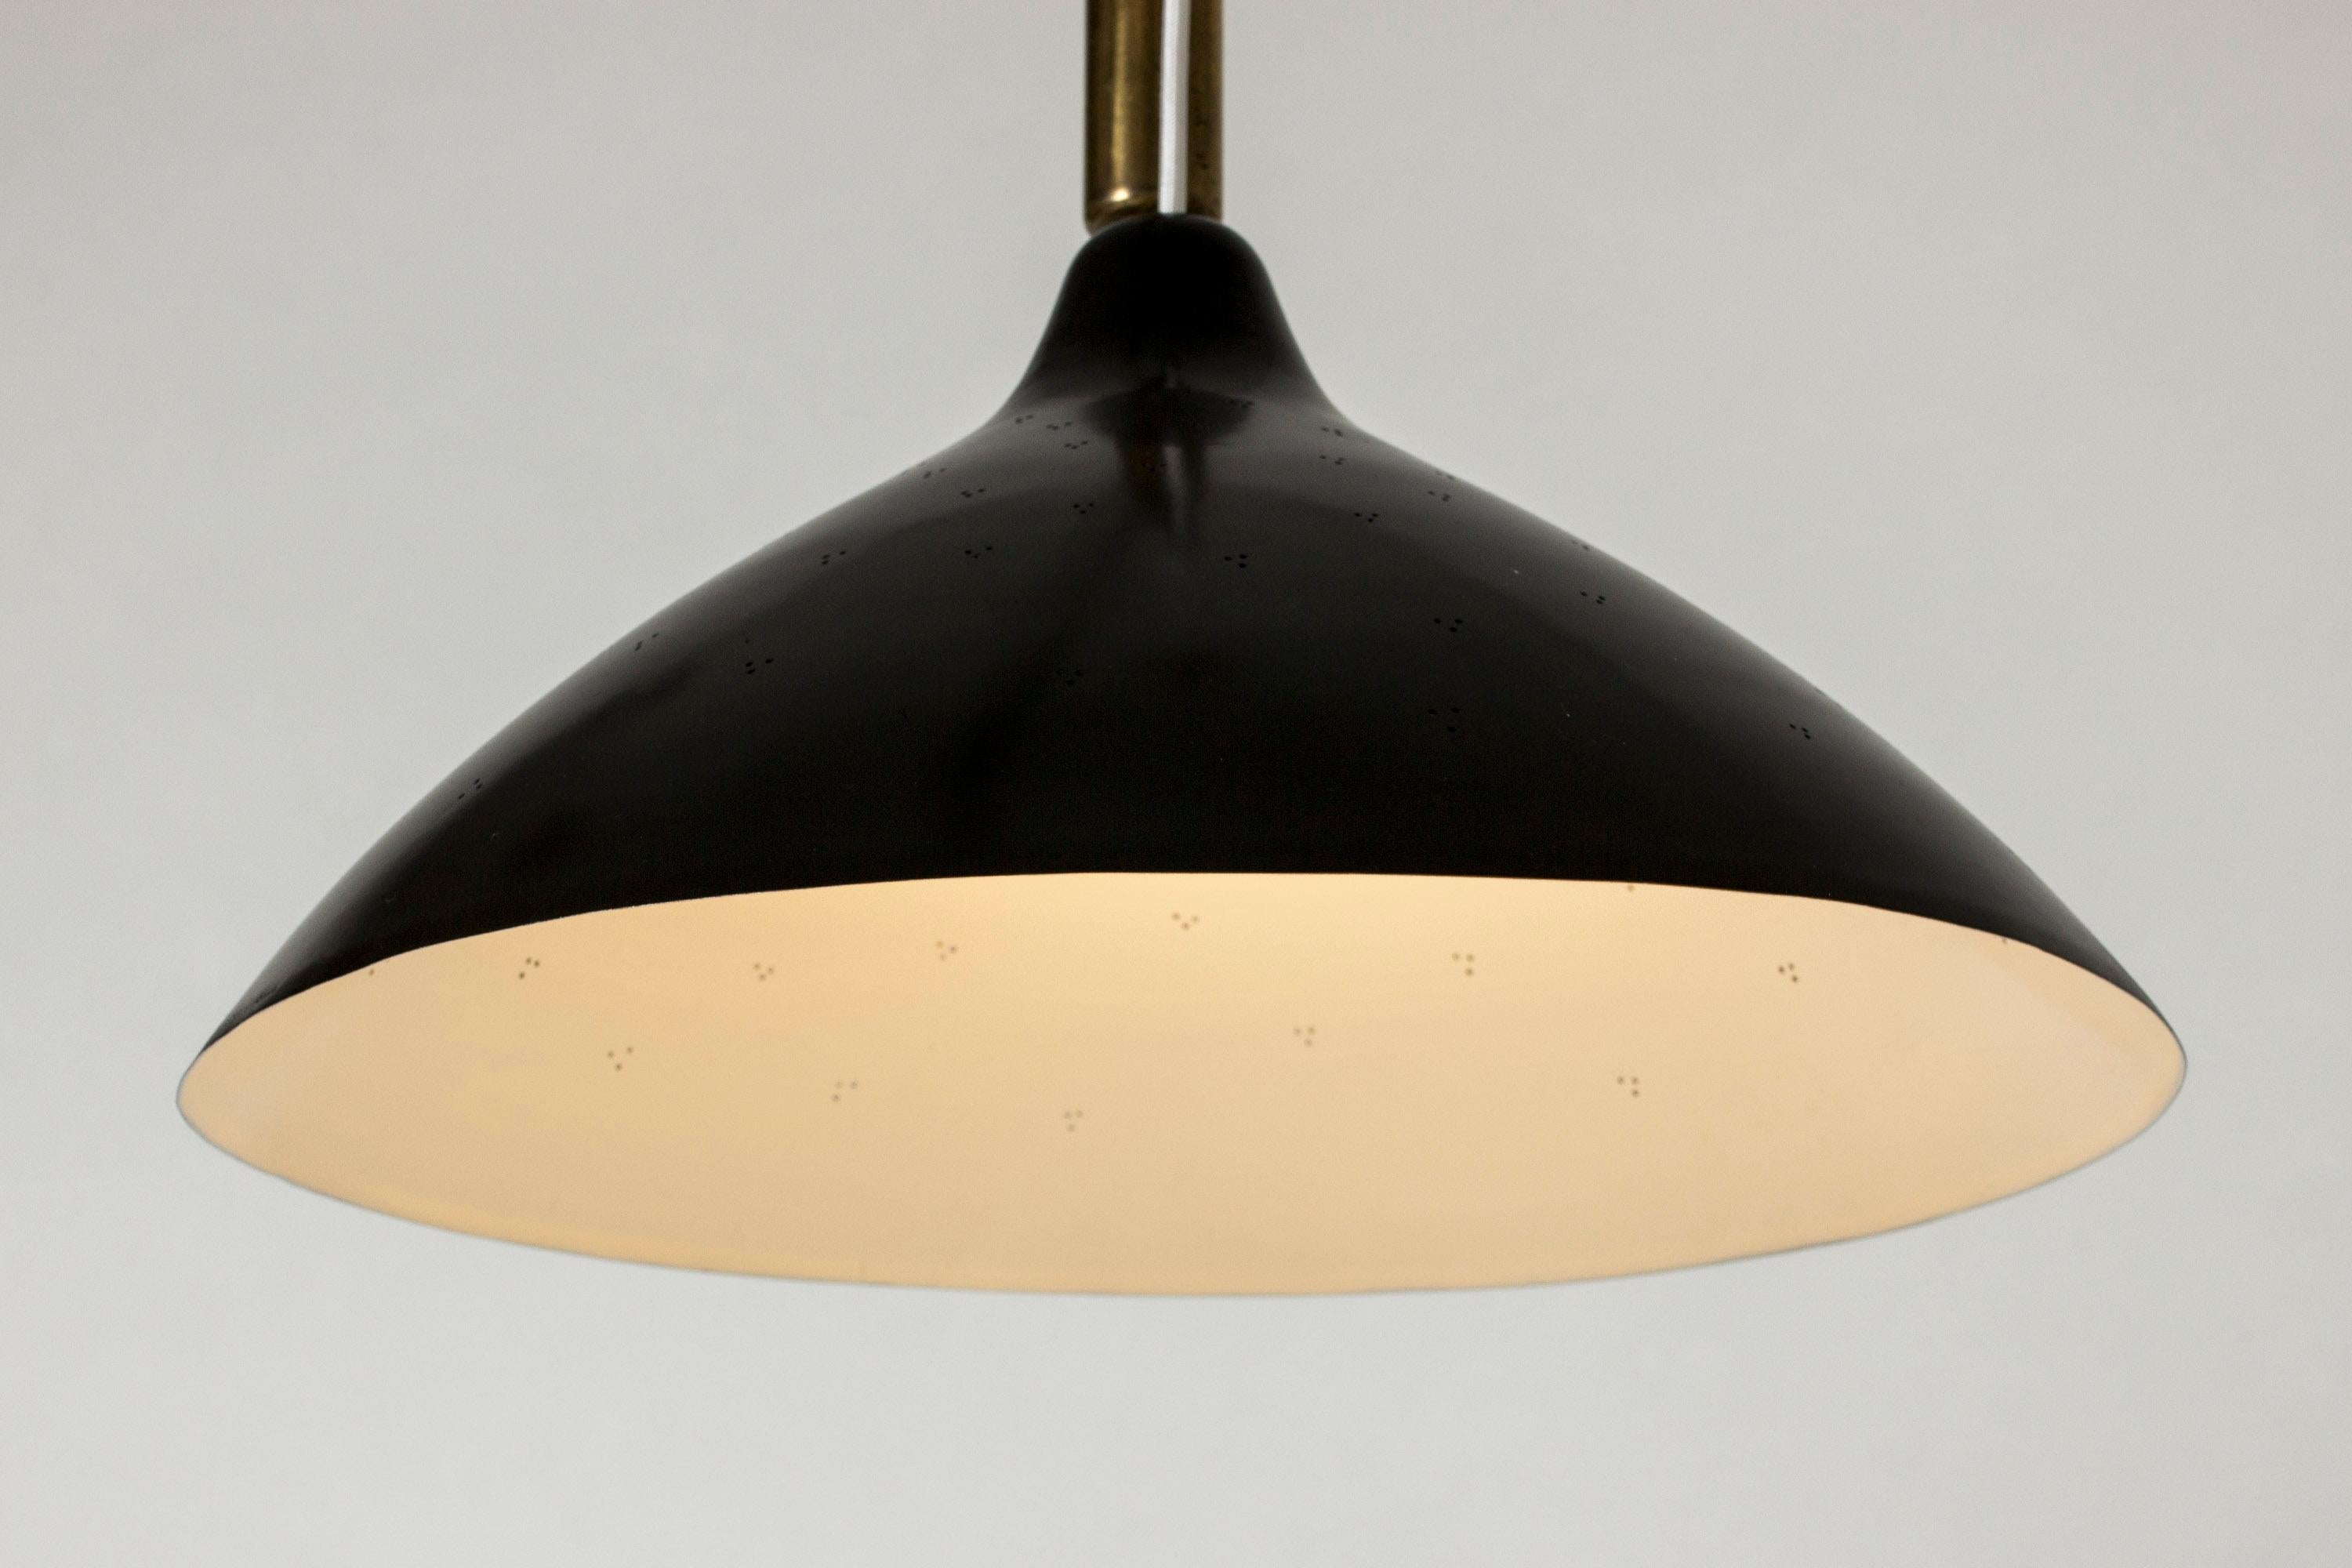 Finnish Ceiling Lamp by Lisa Johansson-Pape for Orno, Finland, 1950s